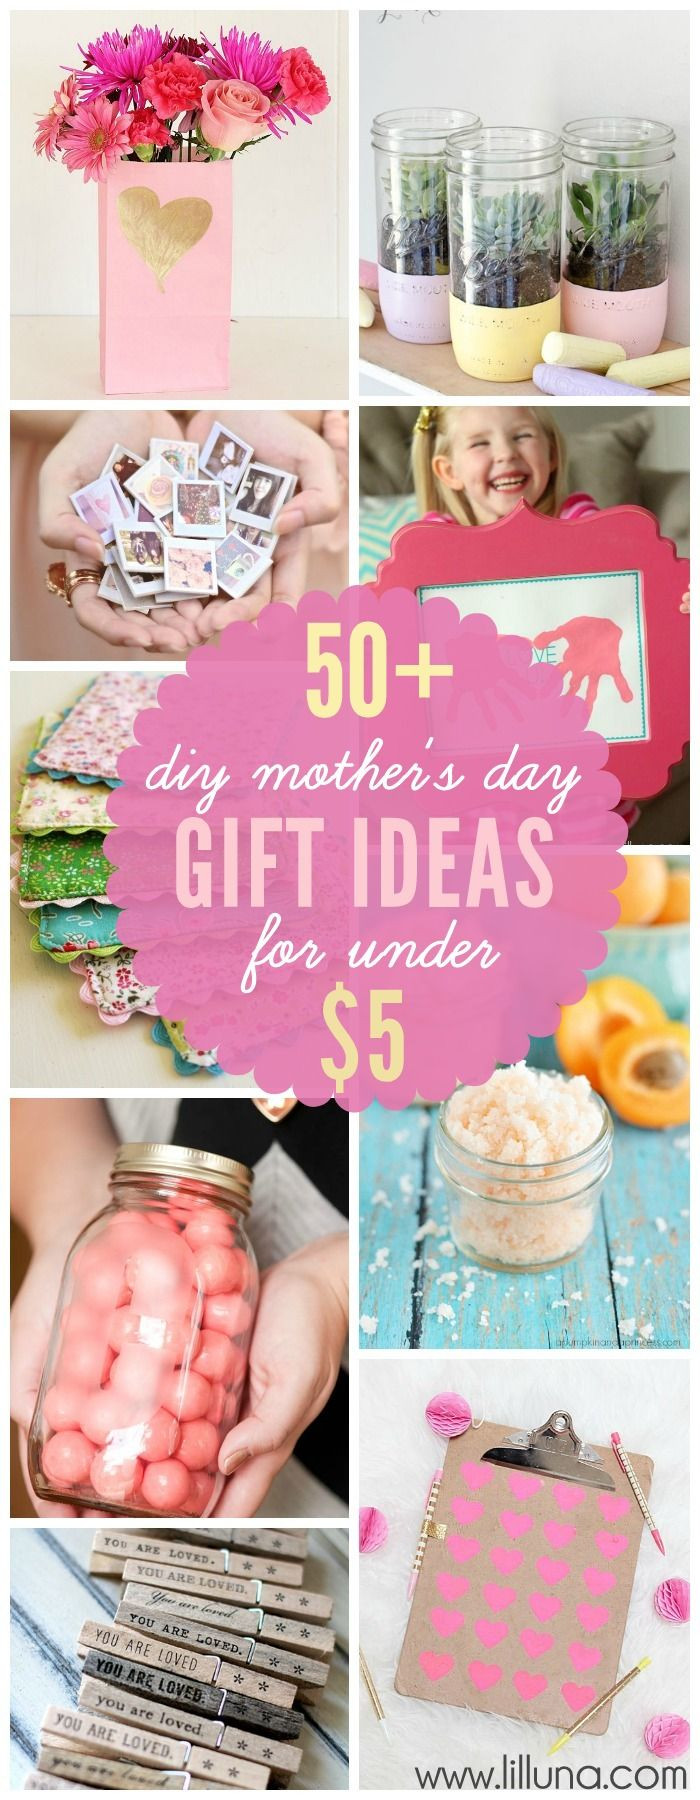 Mothers Day Gift Ideas Wife
 198 best images about Mother s Day Gift Ideas on Pinterest